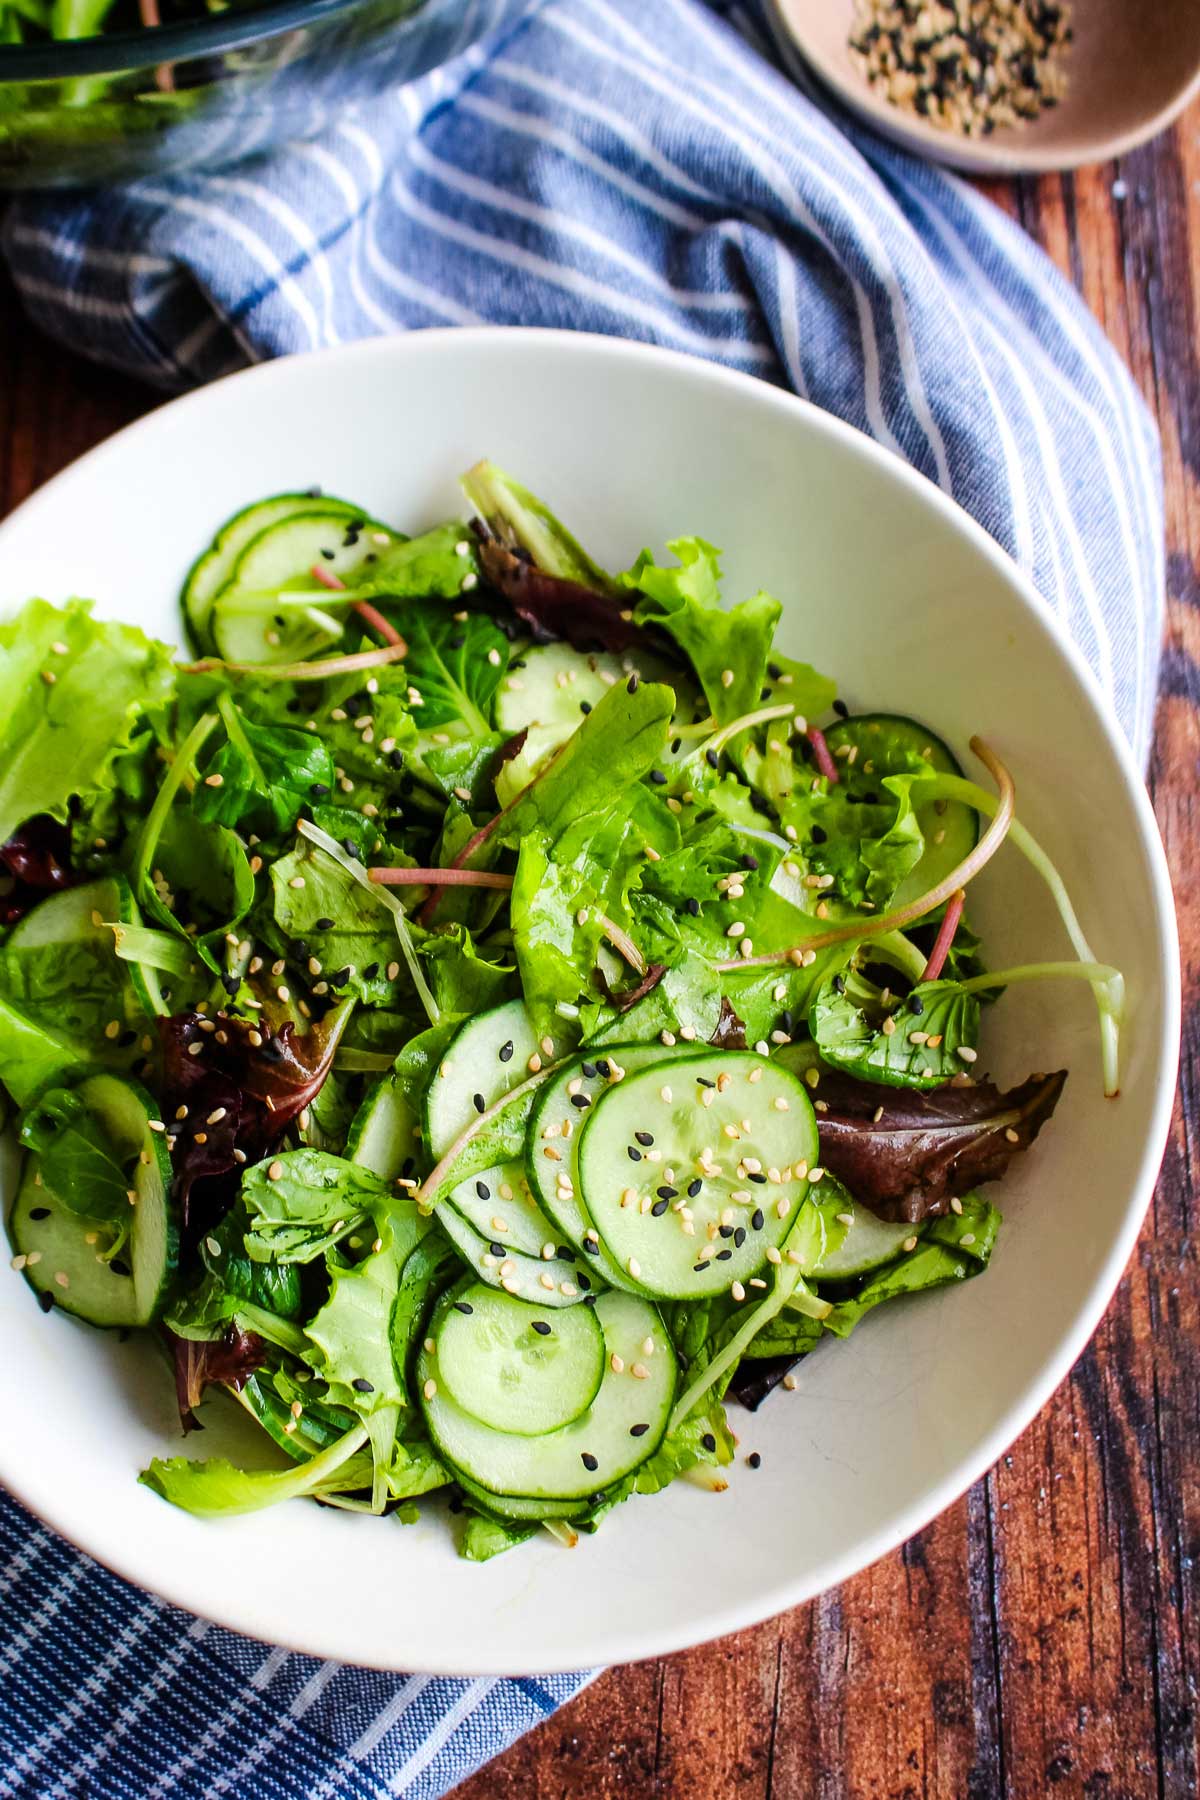 A bowl of Asian cucumber salad with sesame dressing on the table with a blue towel.